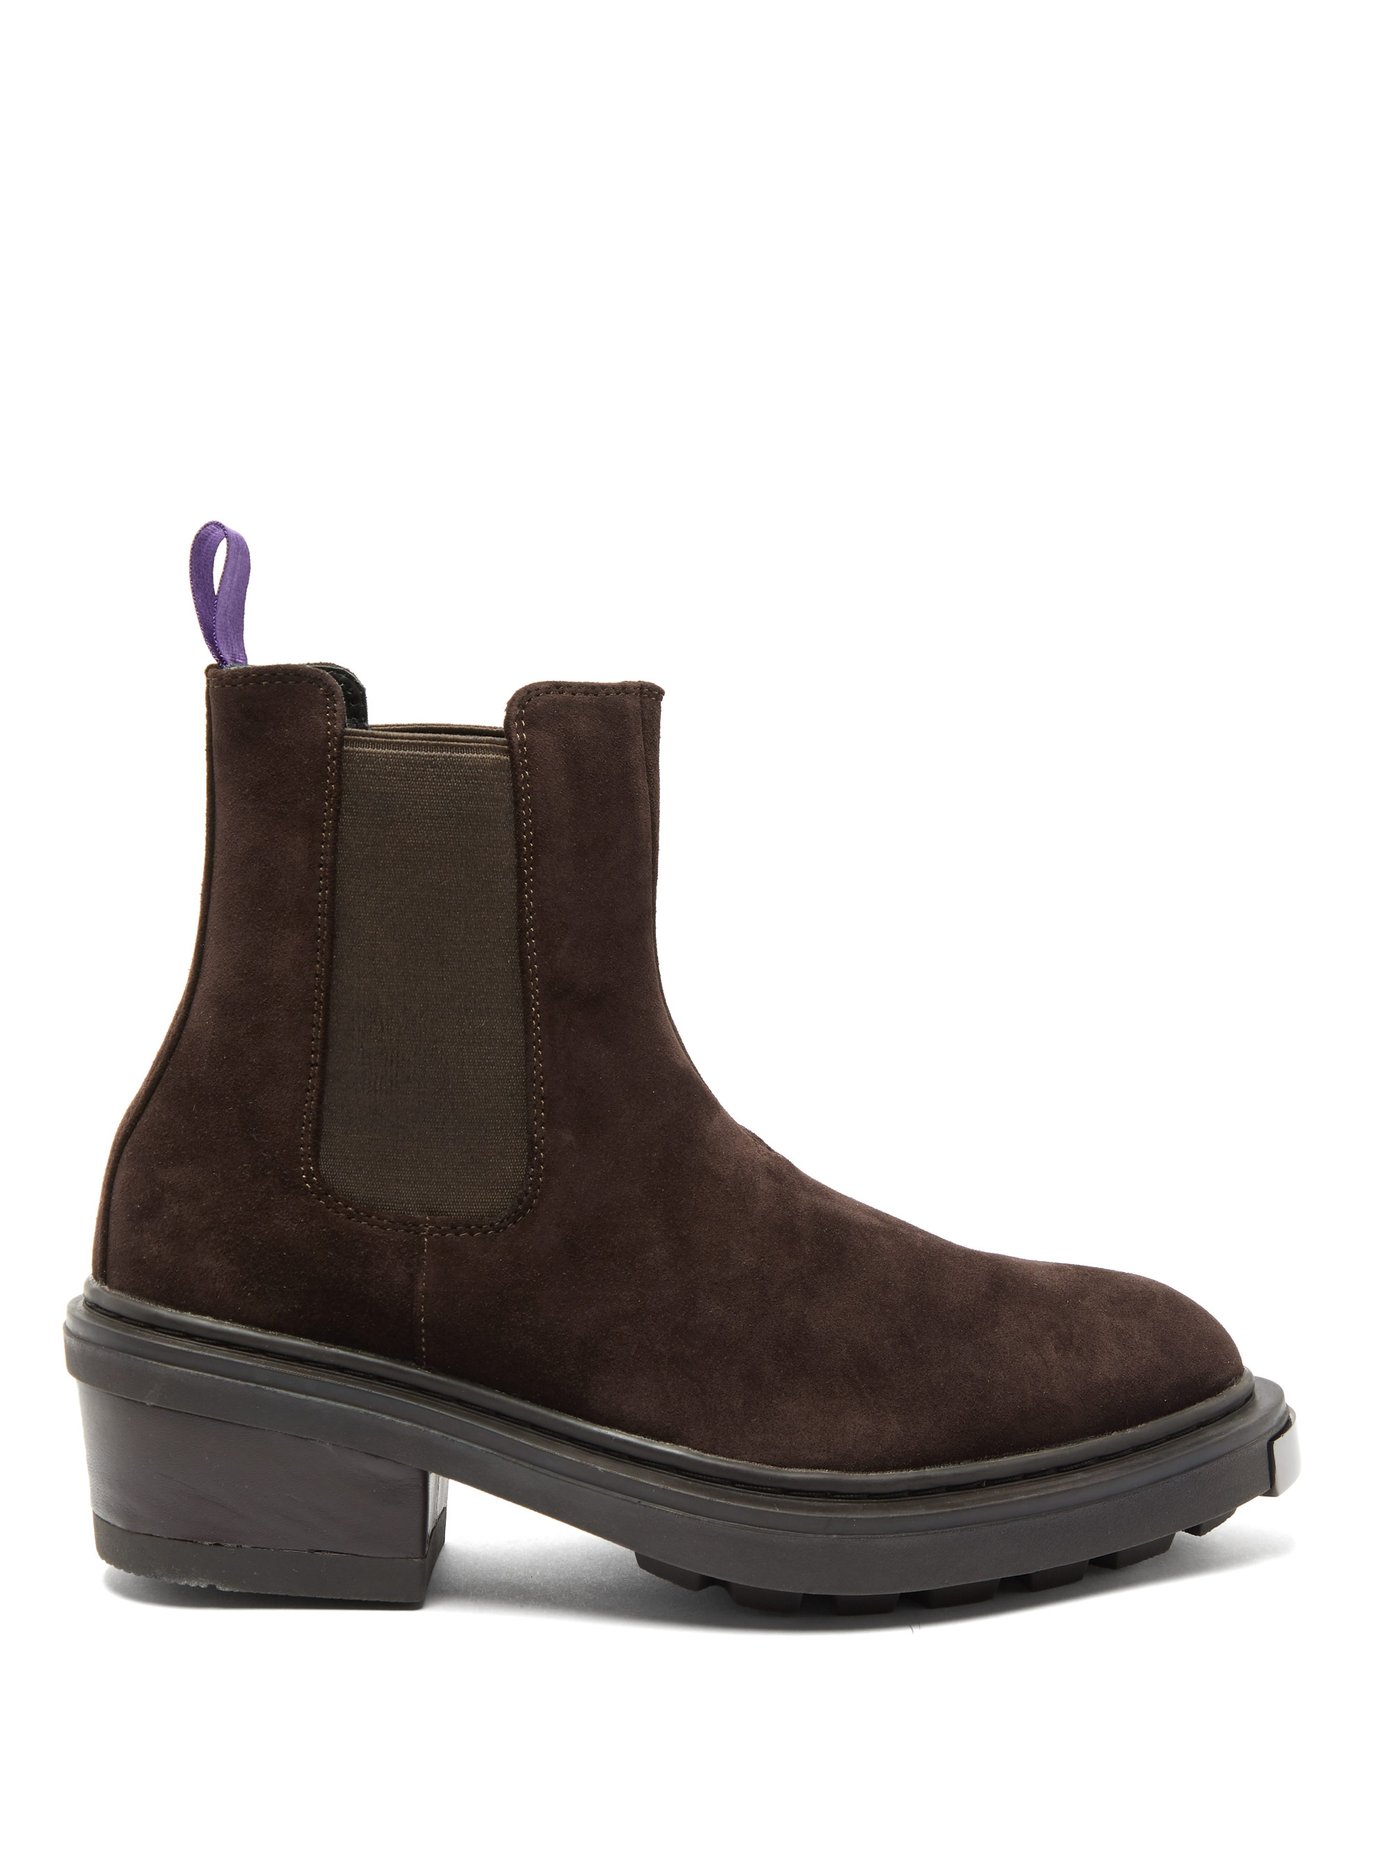 next suede chelsea boots